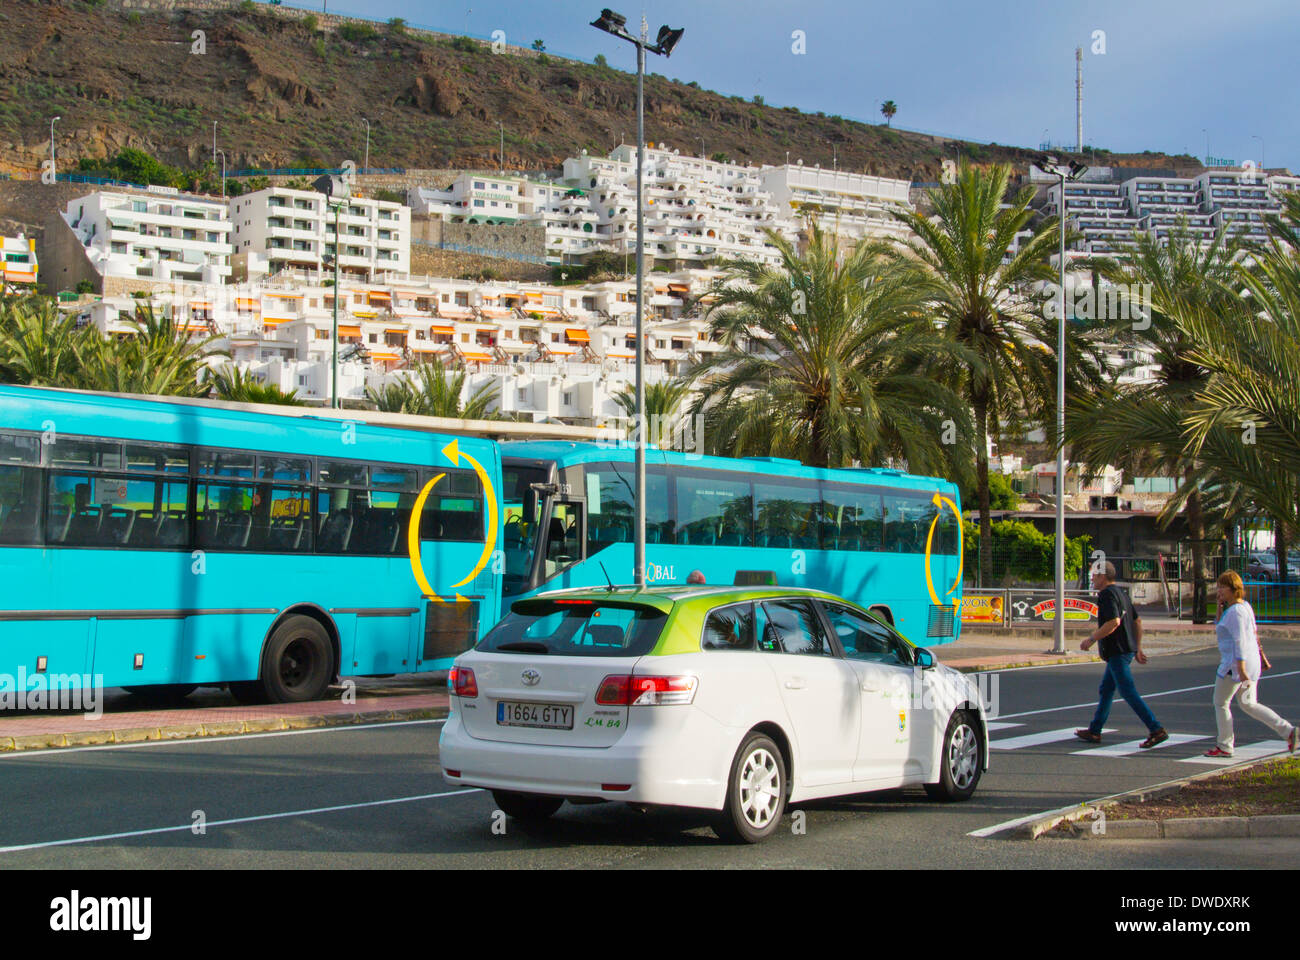 Taxi and bus, long distance bus station, Puerto Rico, Gran Canaria island, the Canary Islands, Spain, Europe Stock Photo